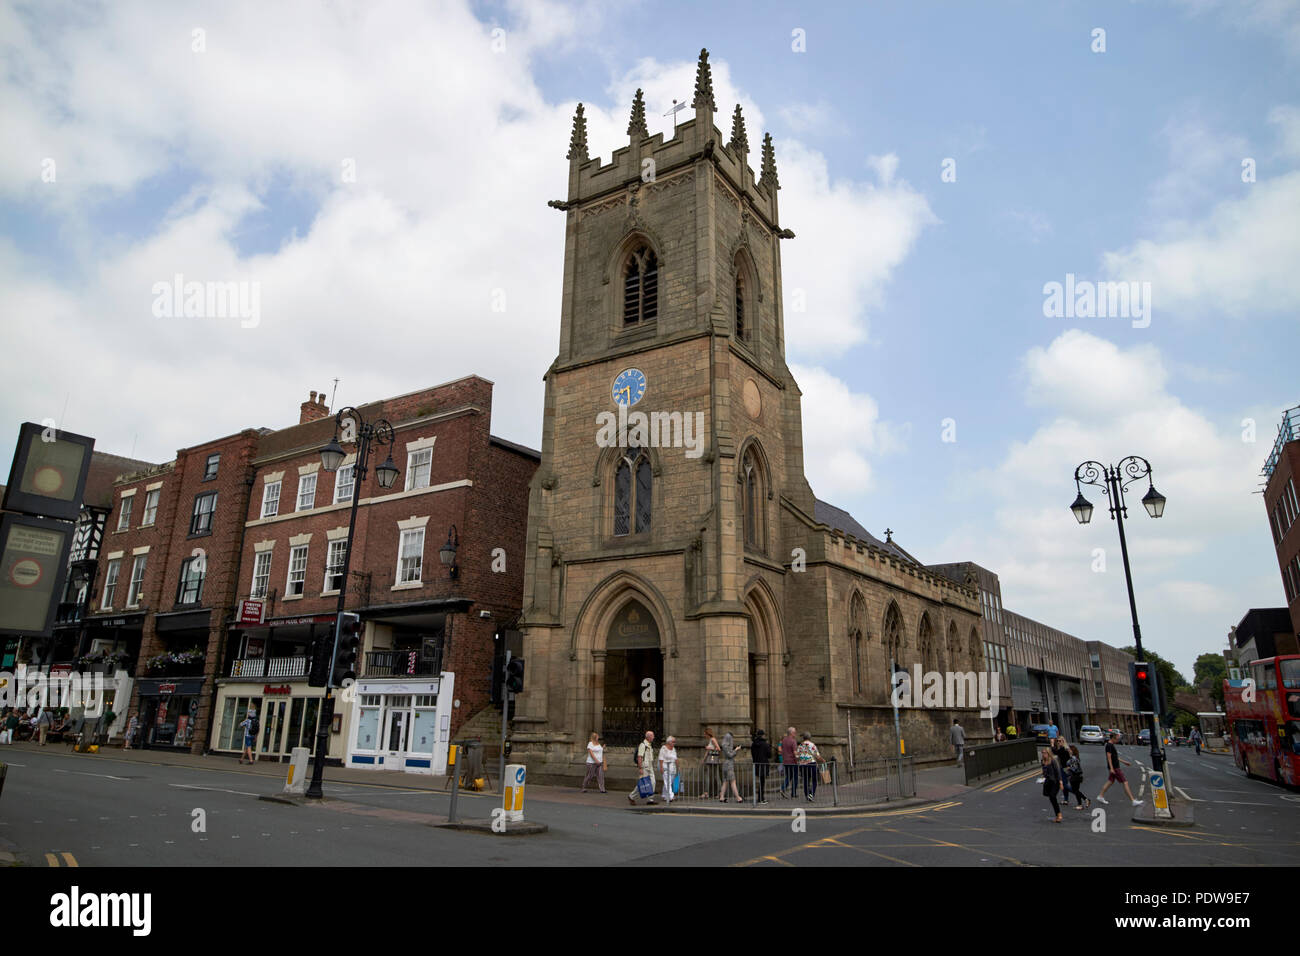 chester history and heritage museum in st michaels church on the corner of bridge street and pepper st chester cheshire england uk Stock Photo